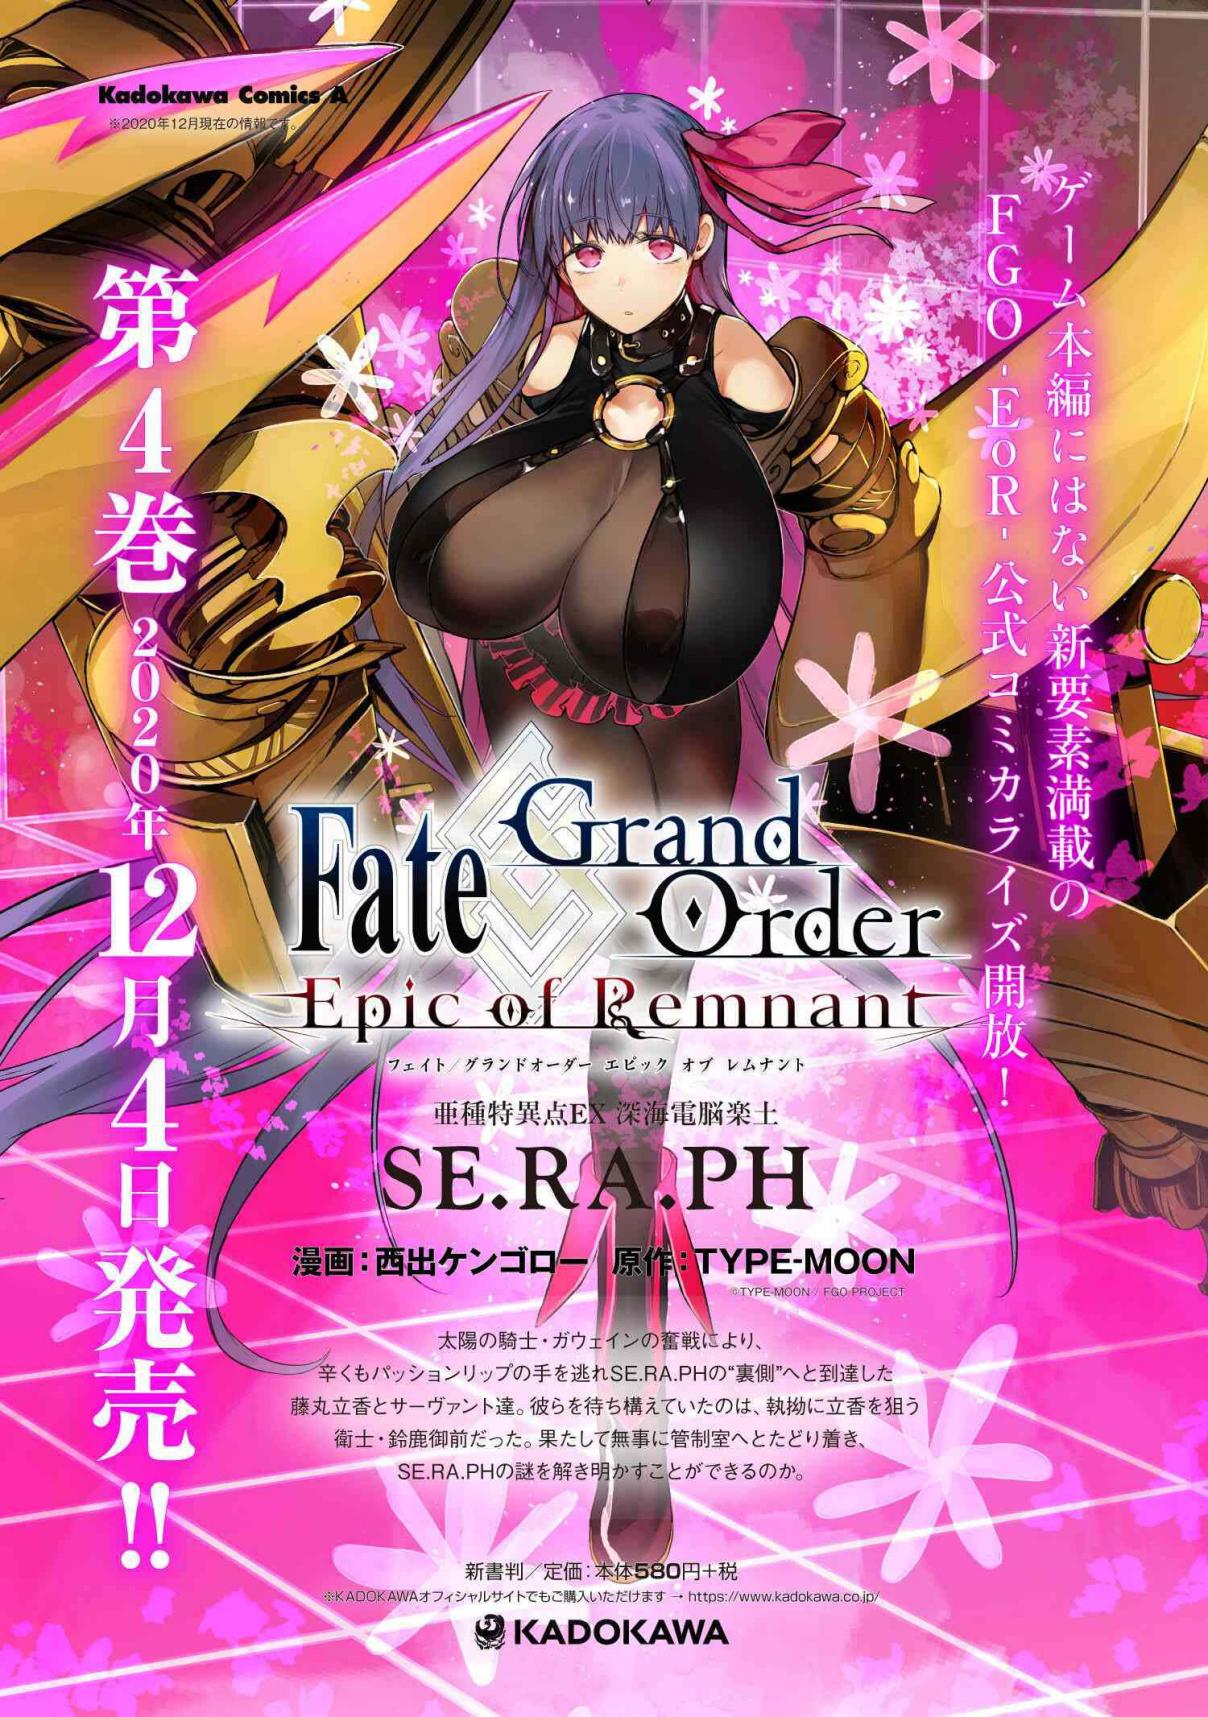 Fate/Grand Order -Epic of Remnant- Deep Sea Cyber-Paradise, SE.RA.PH 20.2